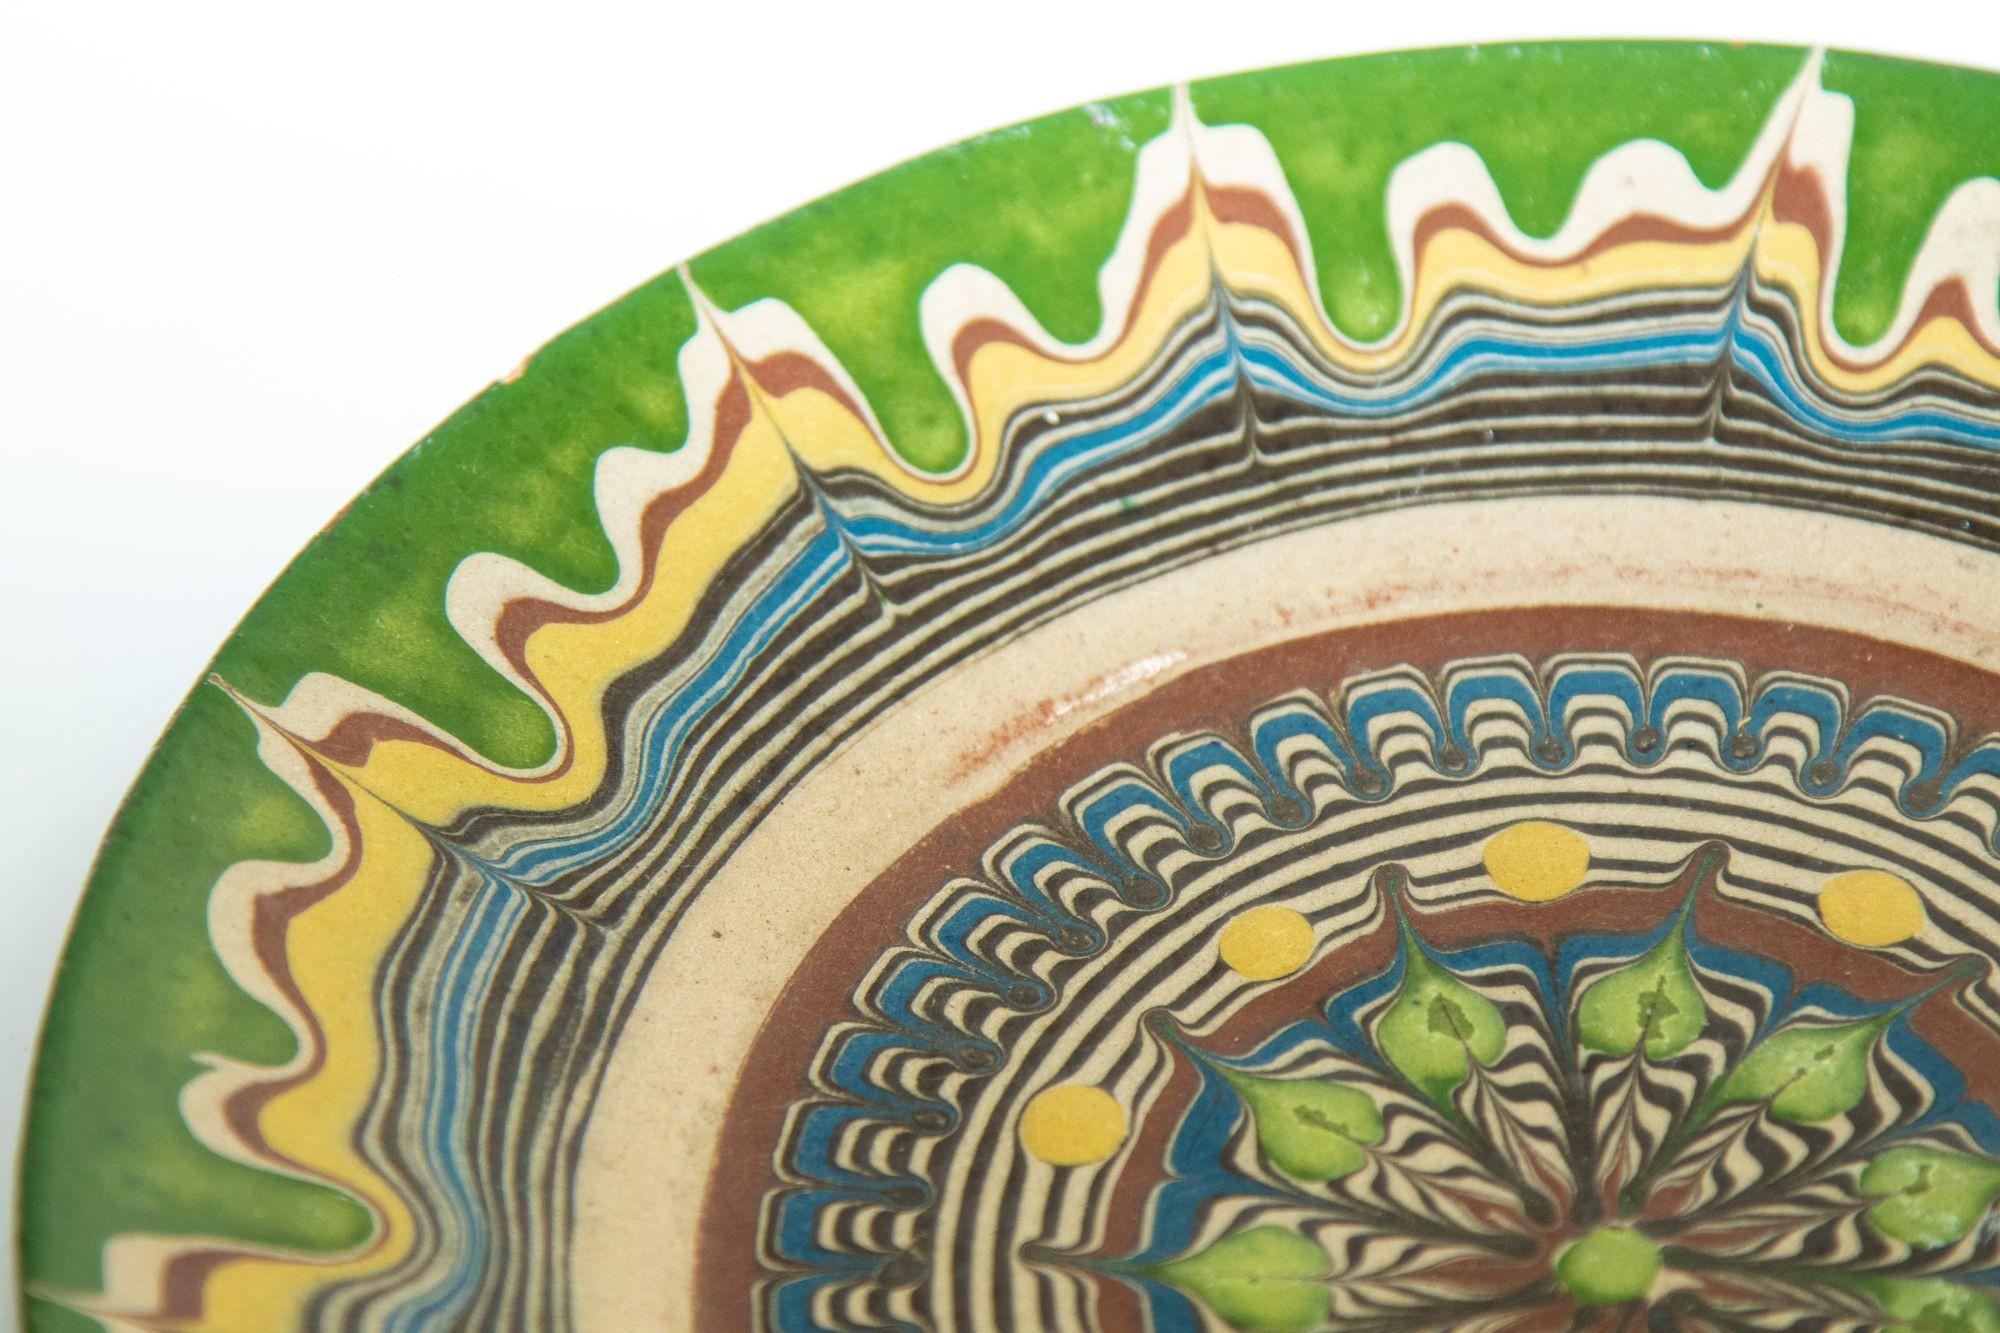 Vintage Romanian Ceramika hand-painted terra cotta pottery decorative plate.
Highly detailed marbleized pattern in shades of green, rust, yellow, ivory and dark brown.
Vintage Handmade ceramica de Horezu pottery plate, Romanian Folk Art, Bascu